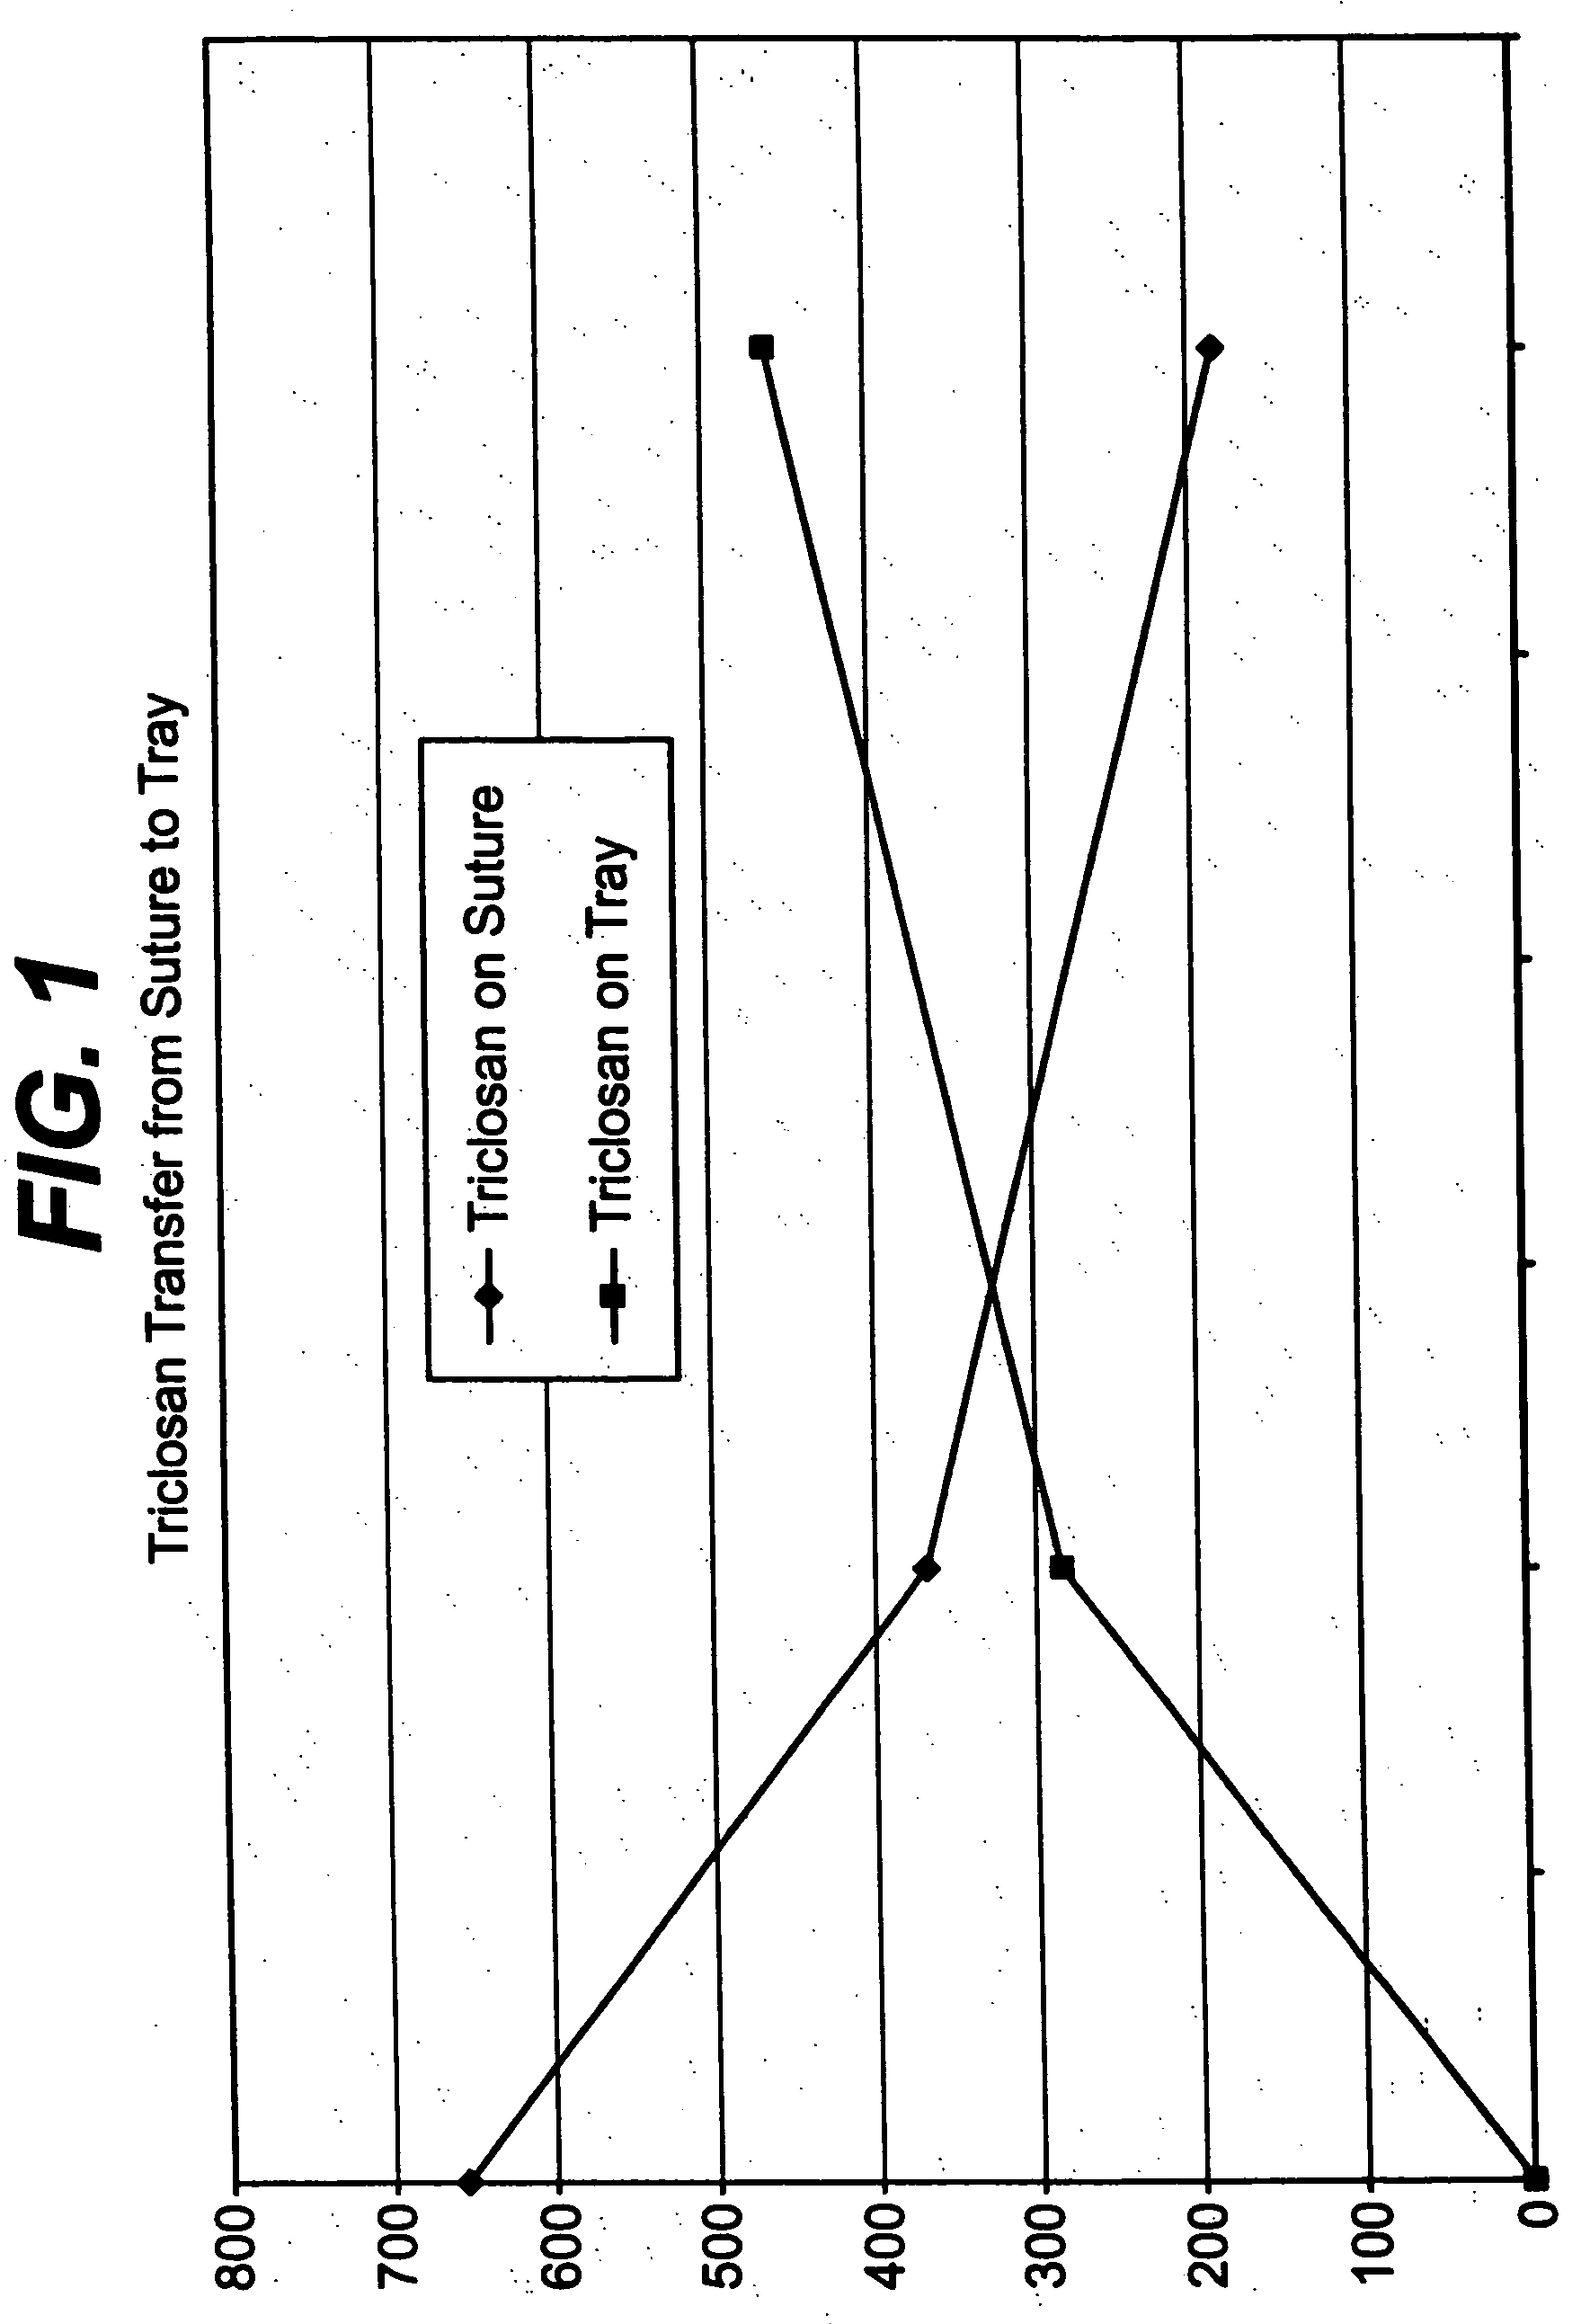 Method of preparing a packaged antimicrobial medical device